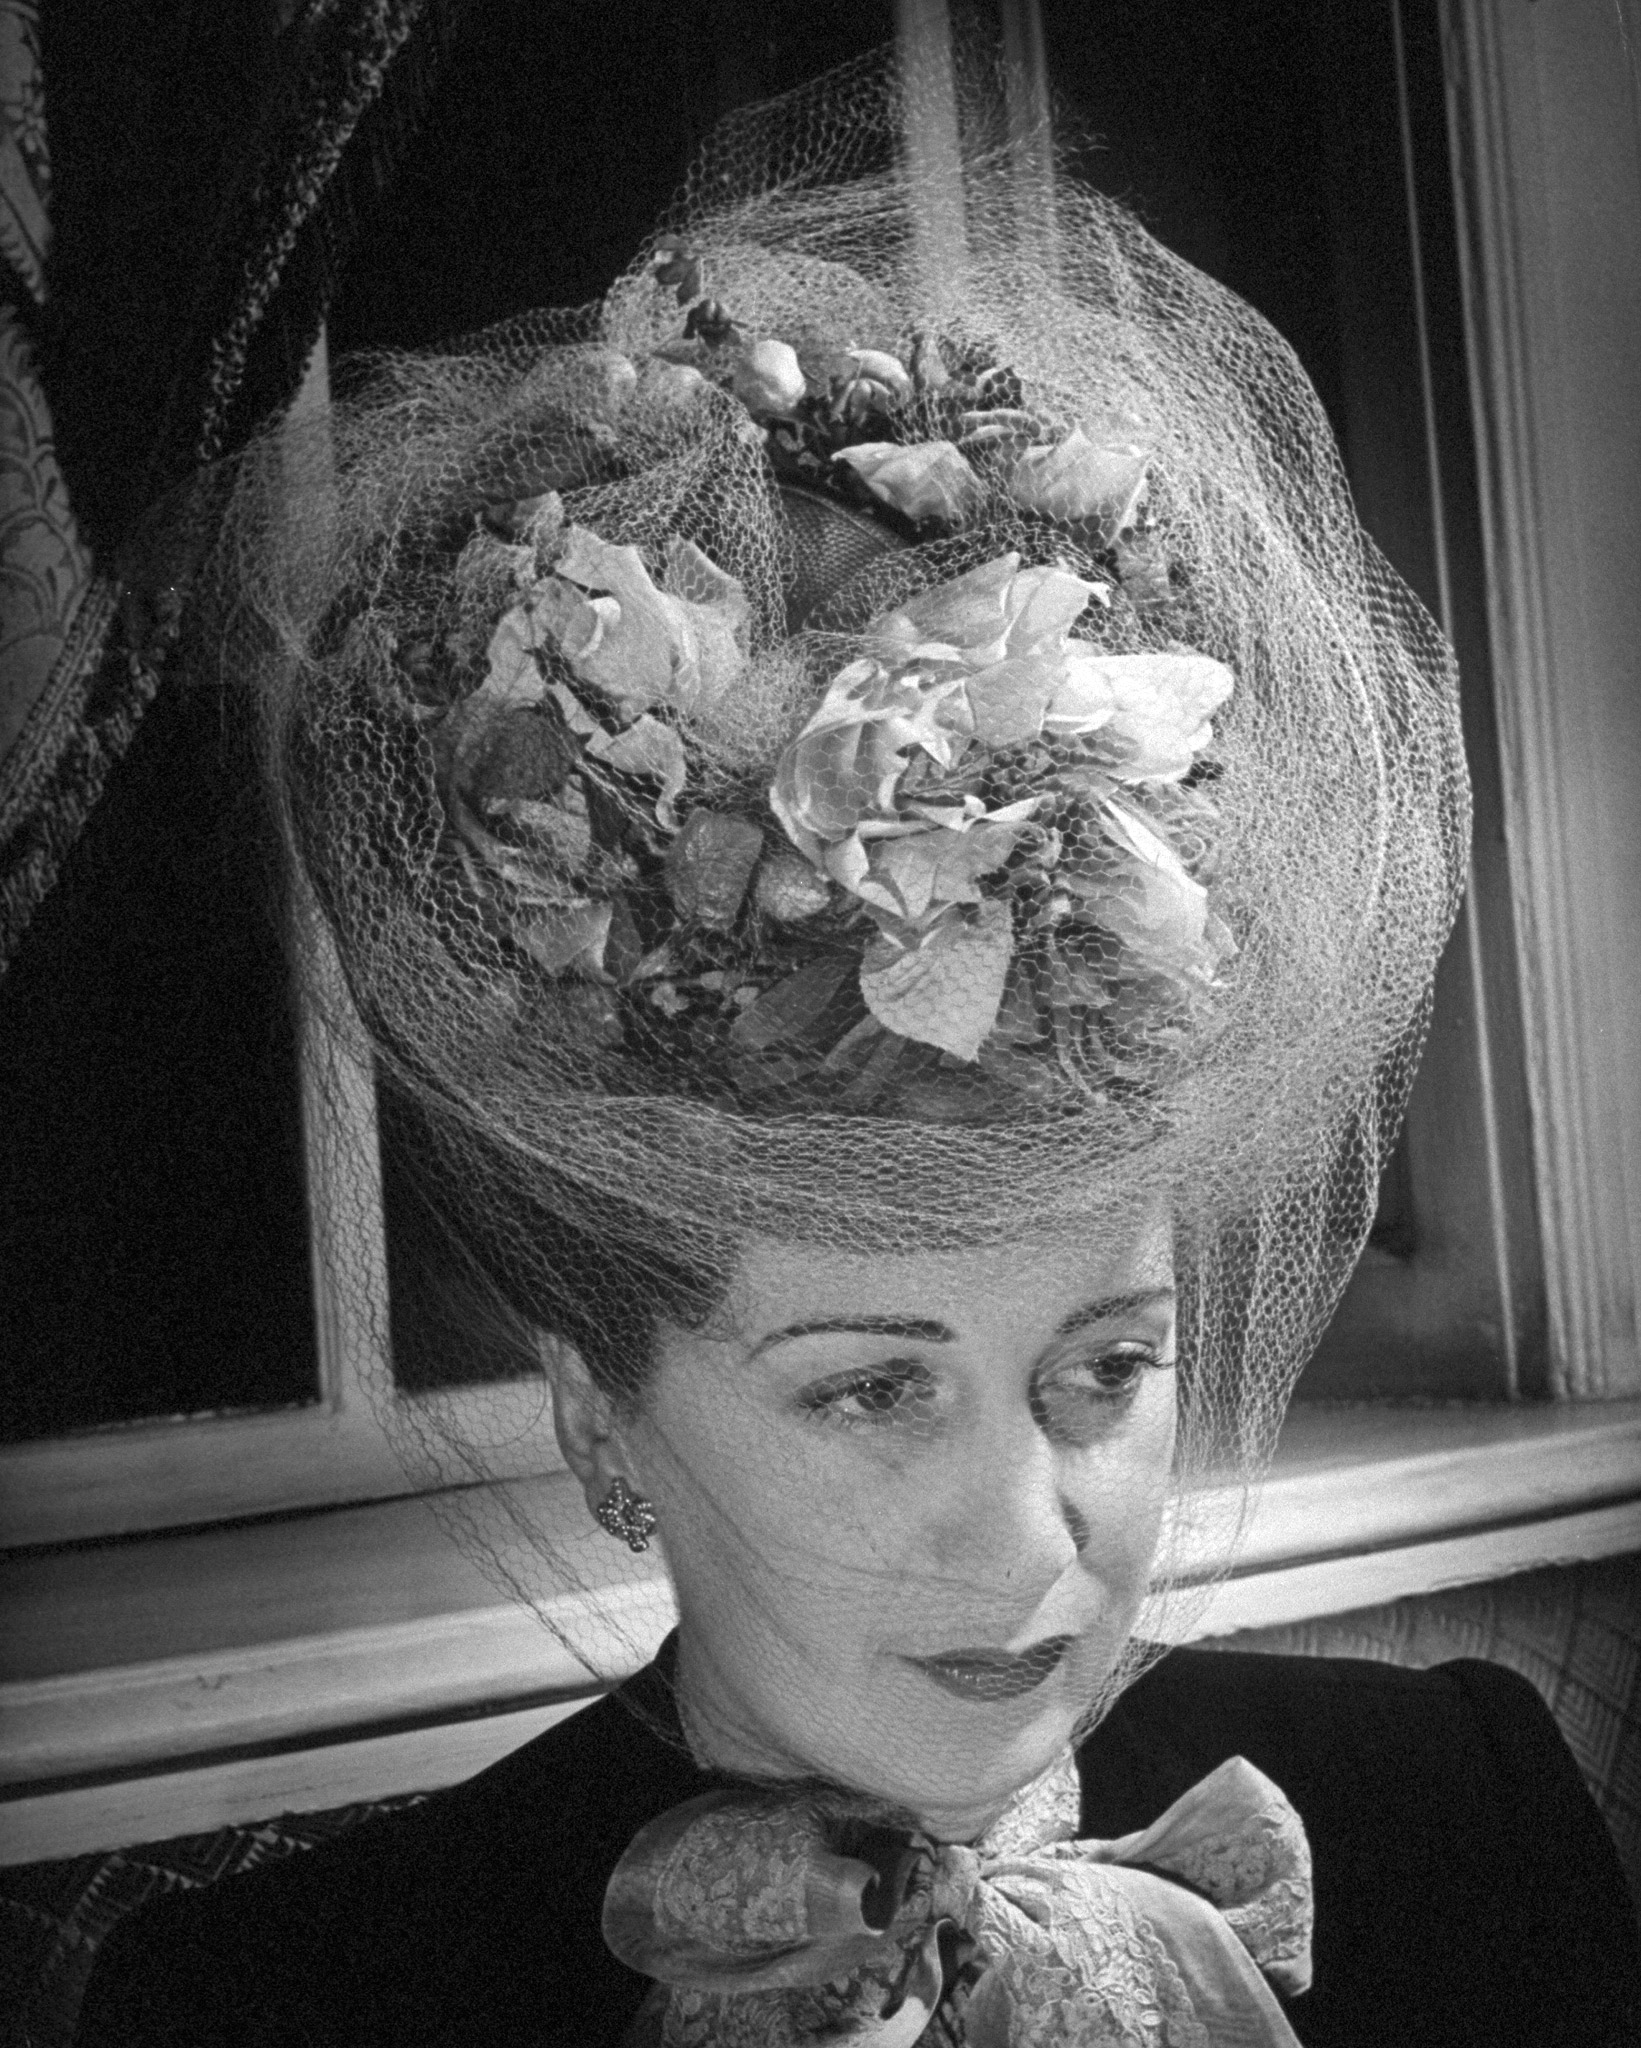 Lady wearing an extravagant hat. 1945.